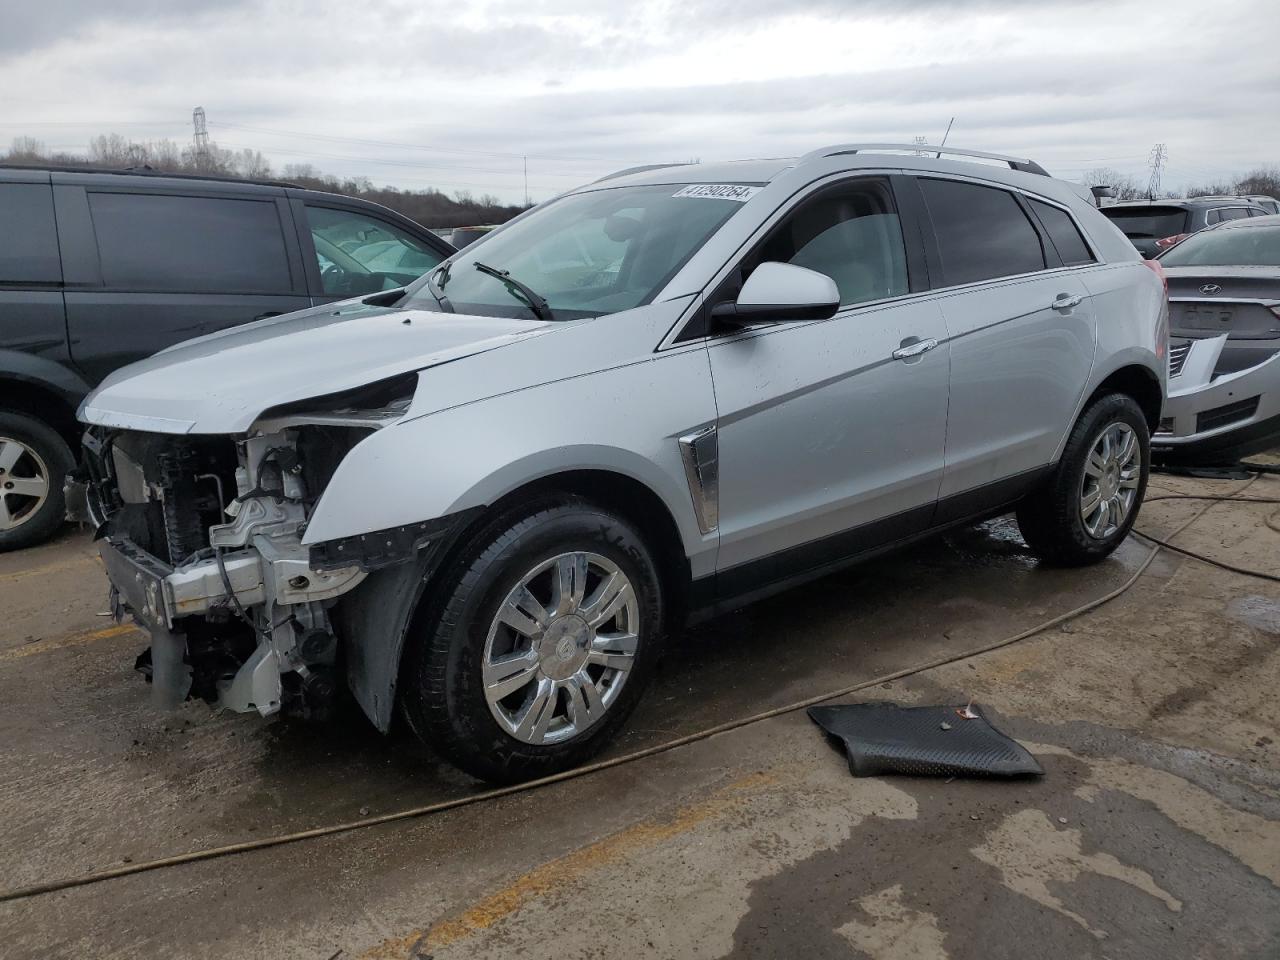 vin: 3GYFNCE3XDS649829 3GYFNCE3XDS649829 2013 cadillac srx 3600 for Sale in 60411 5546, Il - Chicago South, Chicago Heights, USA